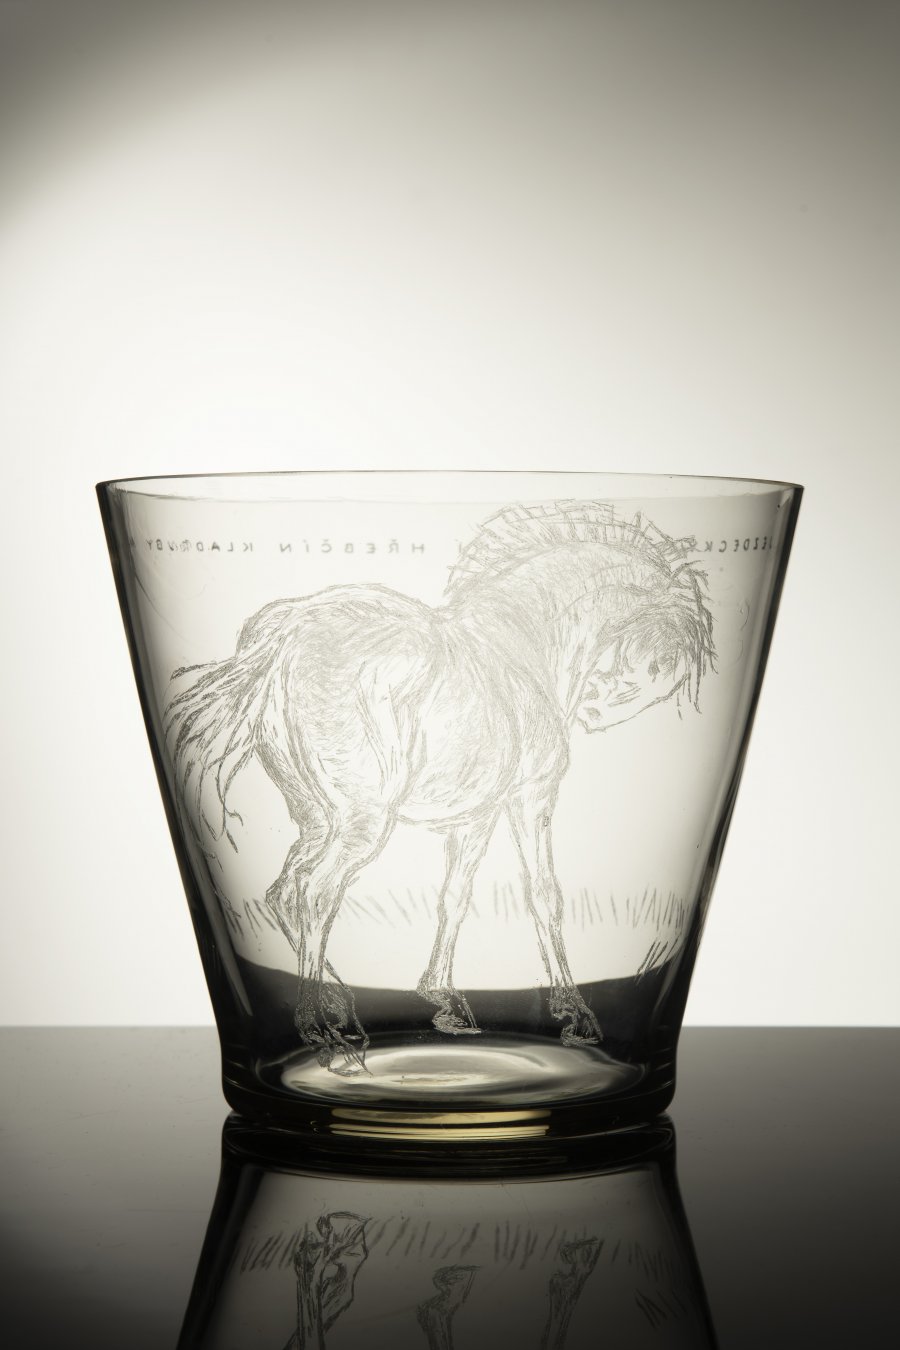 A VASE WITH A HORSE MOTIF